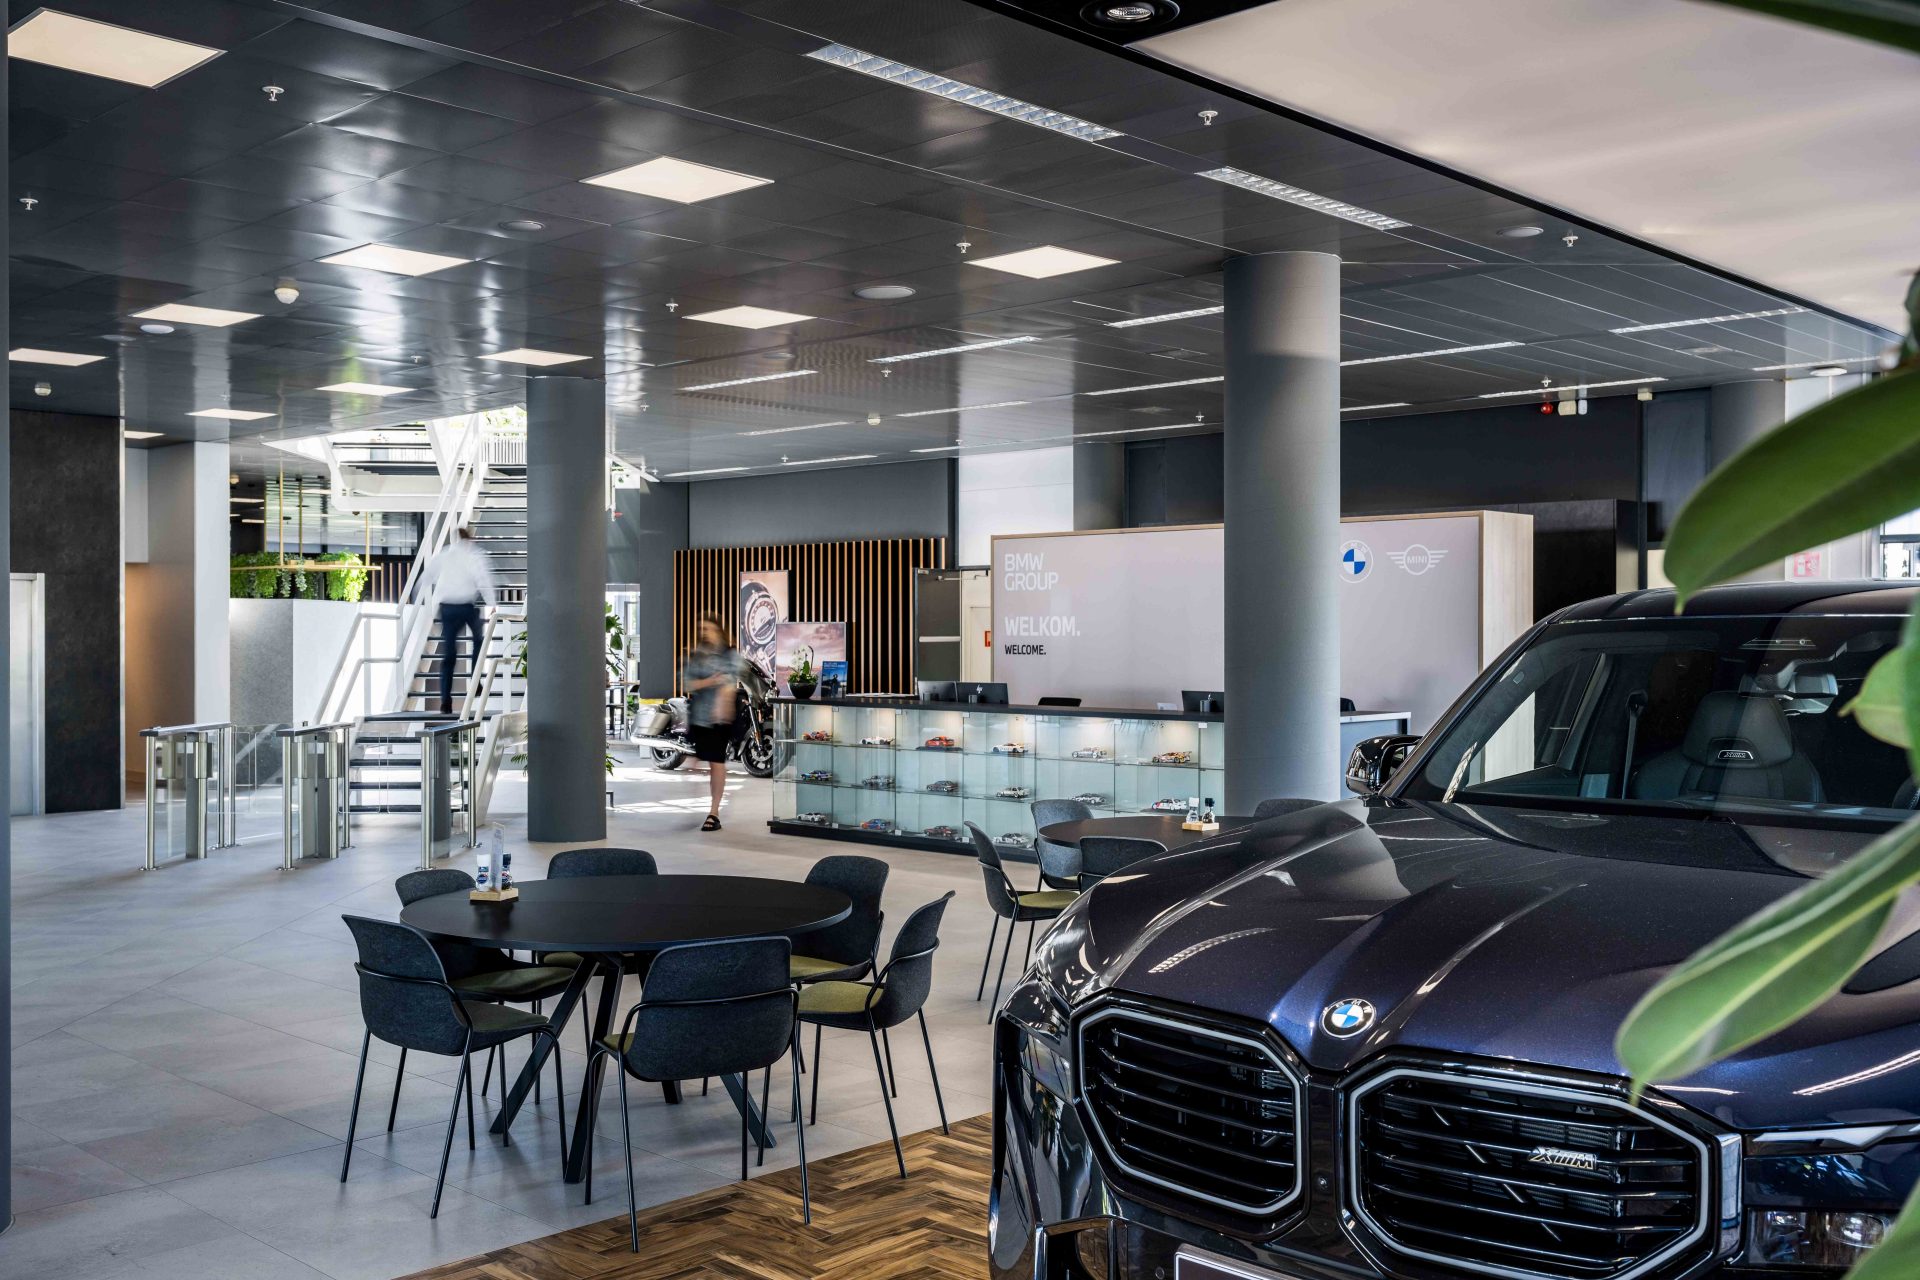 Entrance hall in the BMW Group Netherlands.